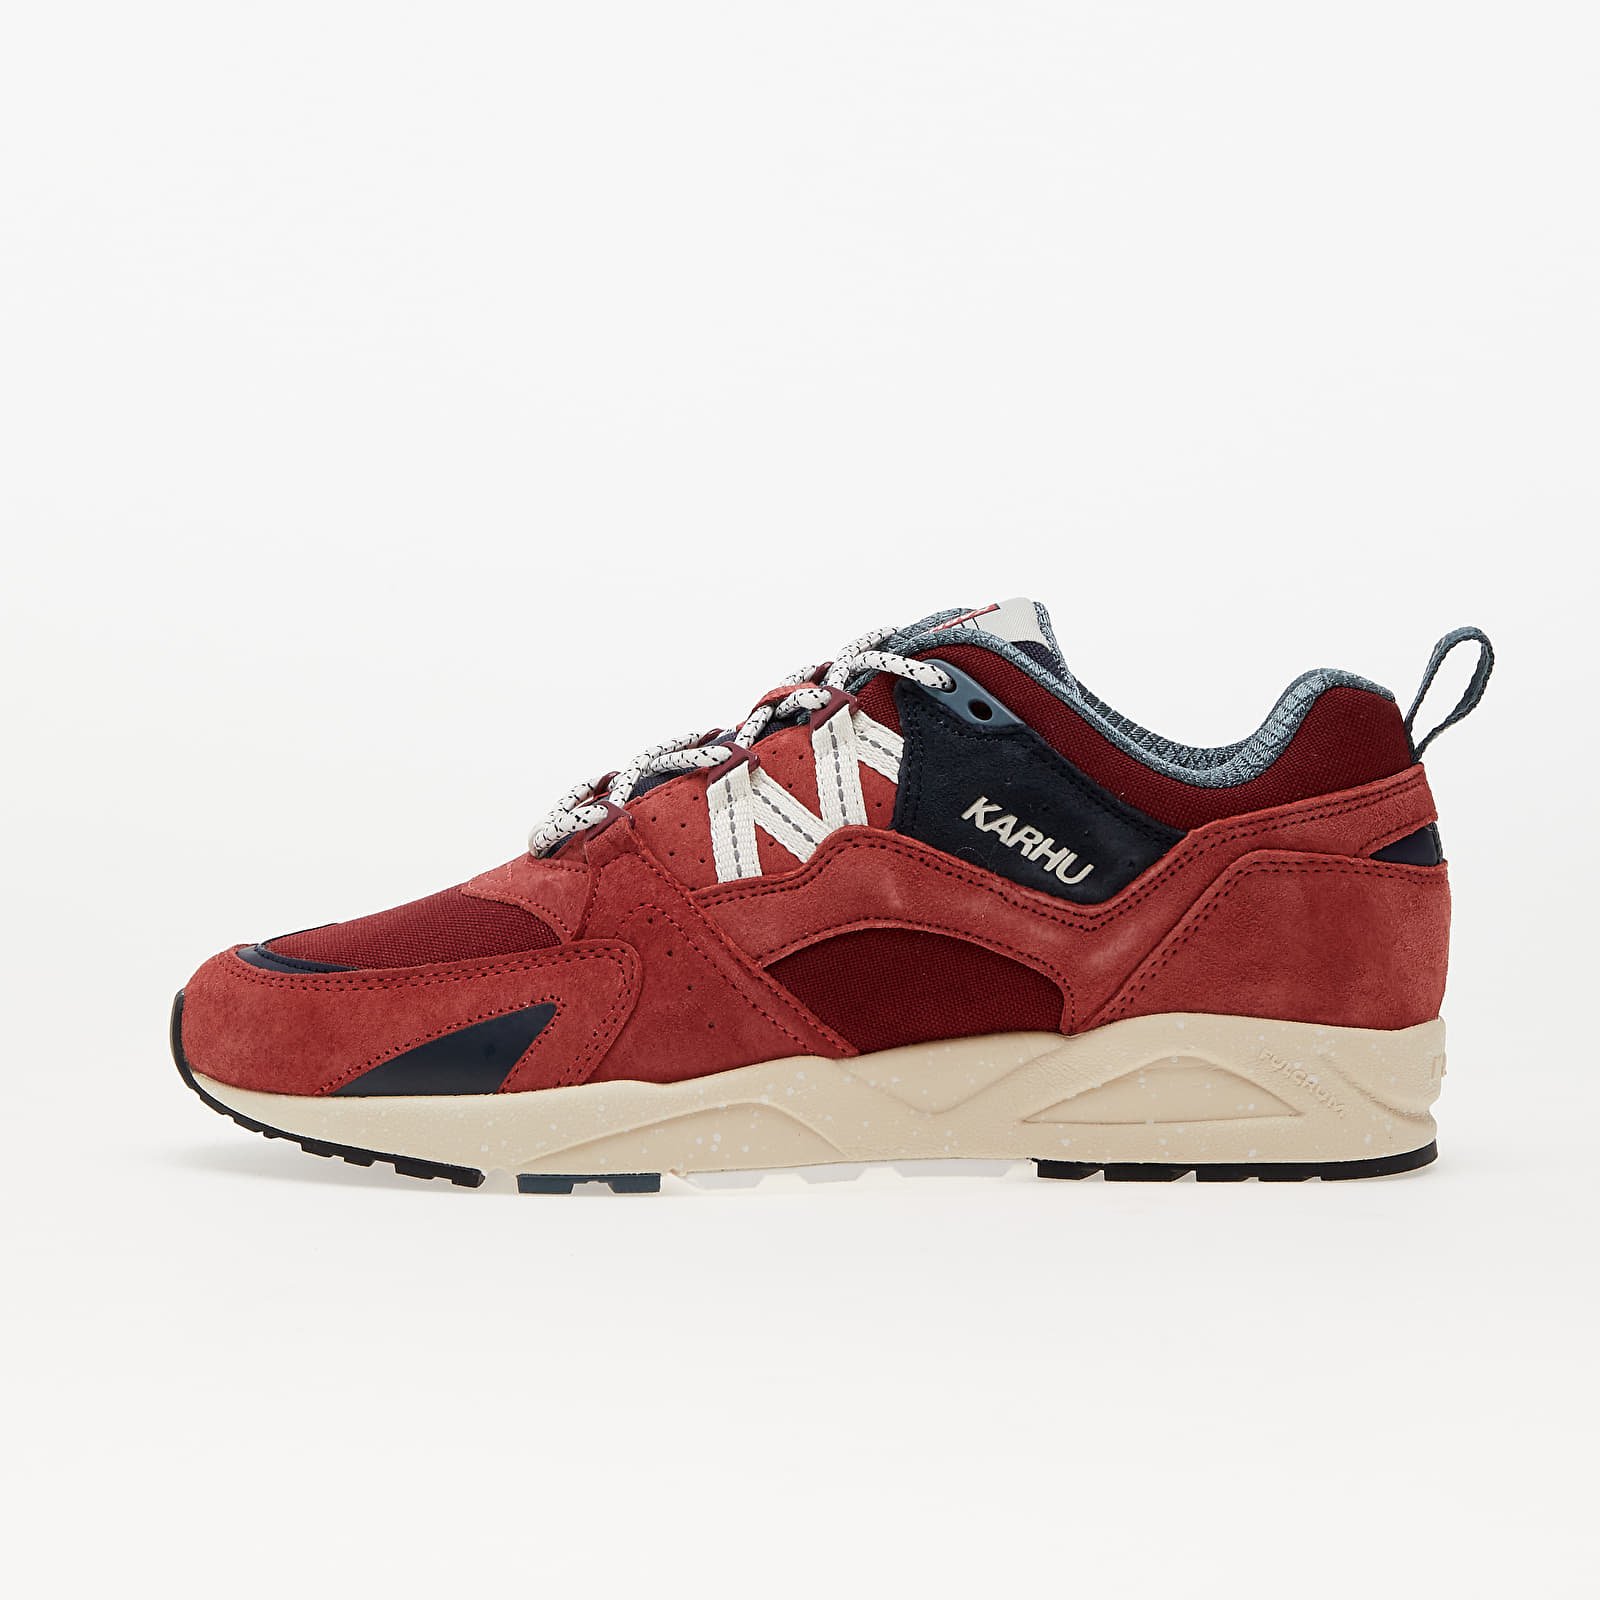 Herenschoenen Karhu Fusion 2.0 Mineral Red/ Lily White